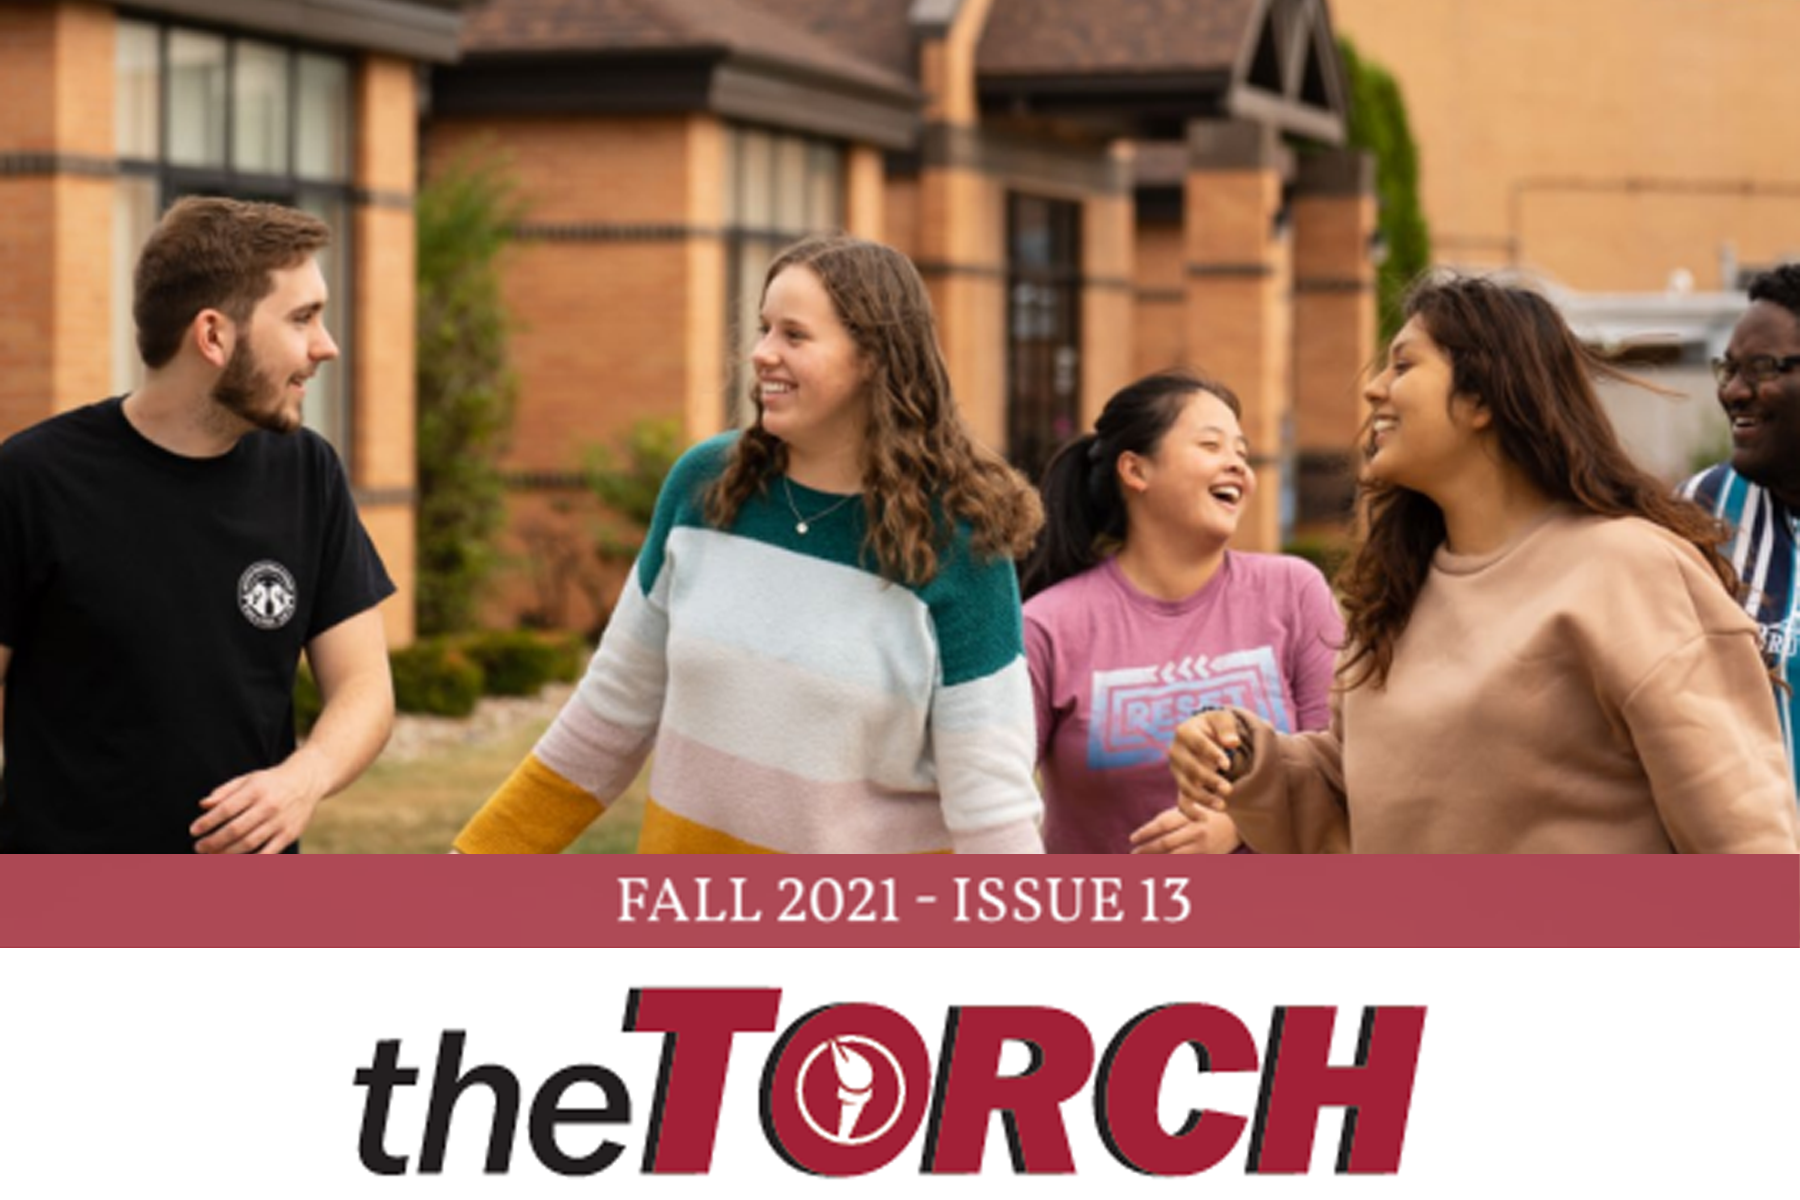 The Torch Issue 13 Cover